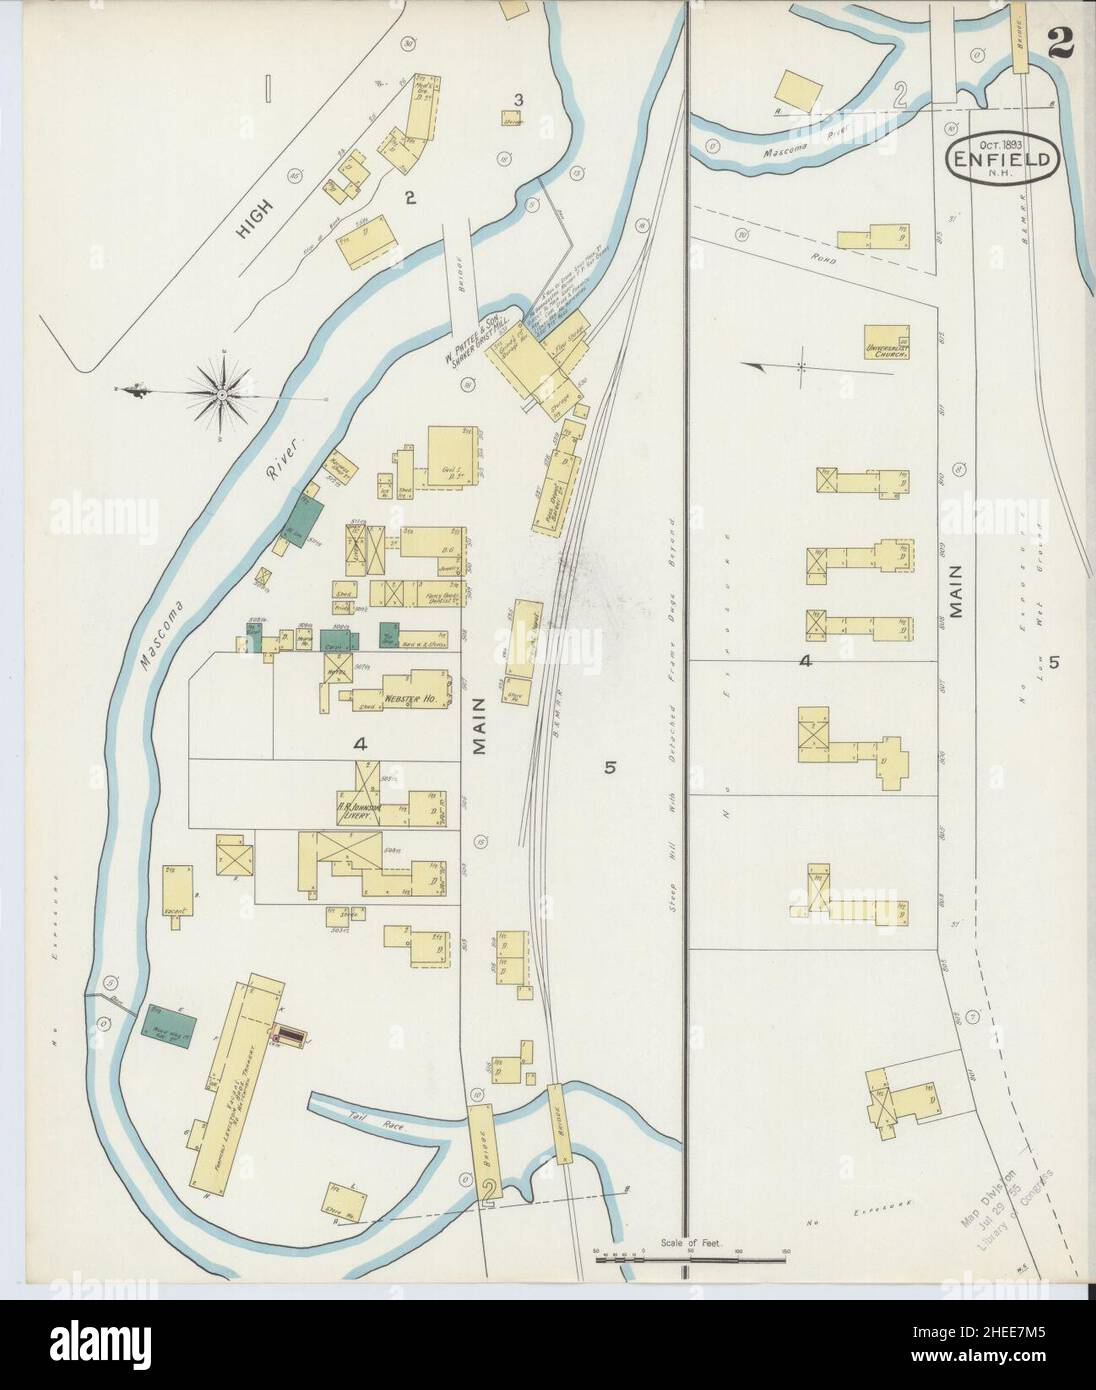 Sanborn Fire Insurance Map from Enfield, Grafton County, New Hampshire. Stock Photo